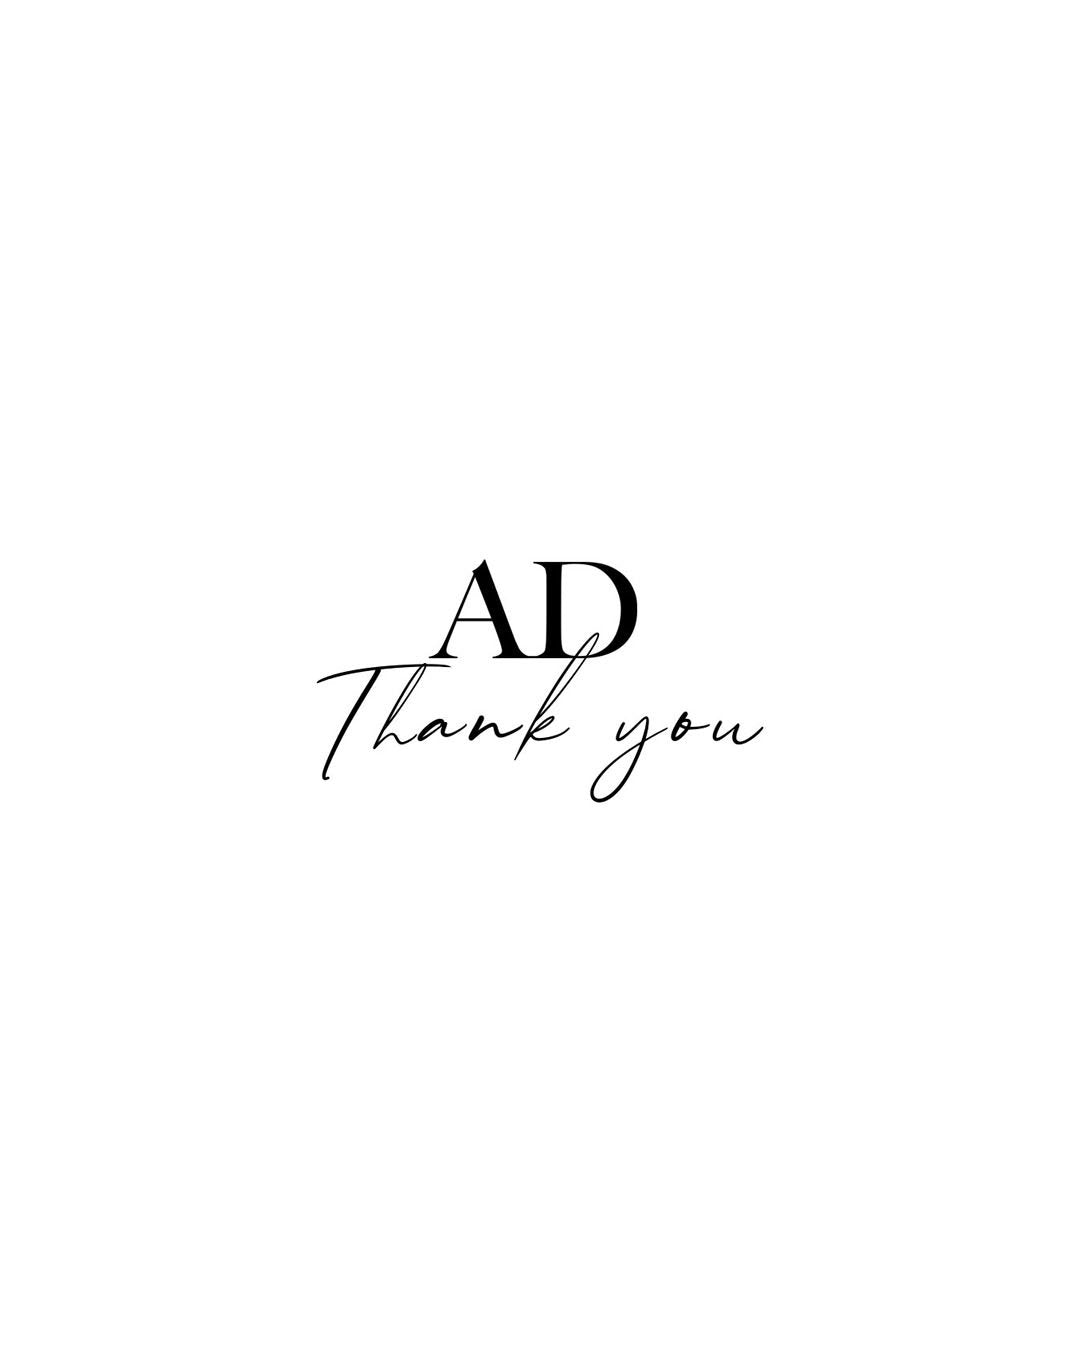 All about...AD Thank You